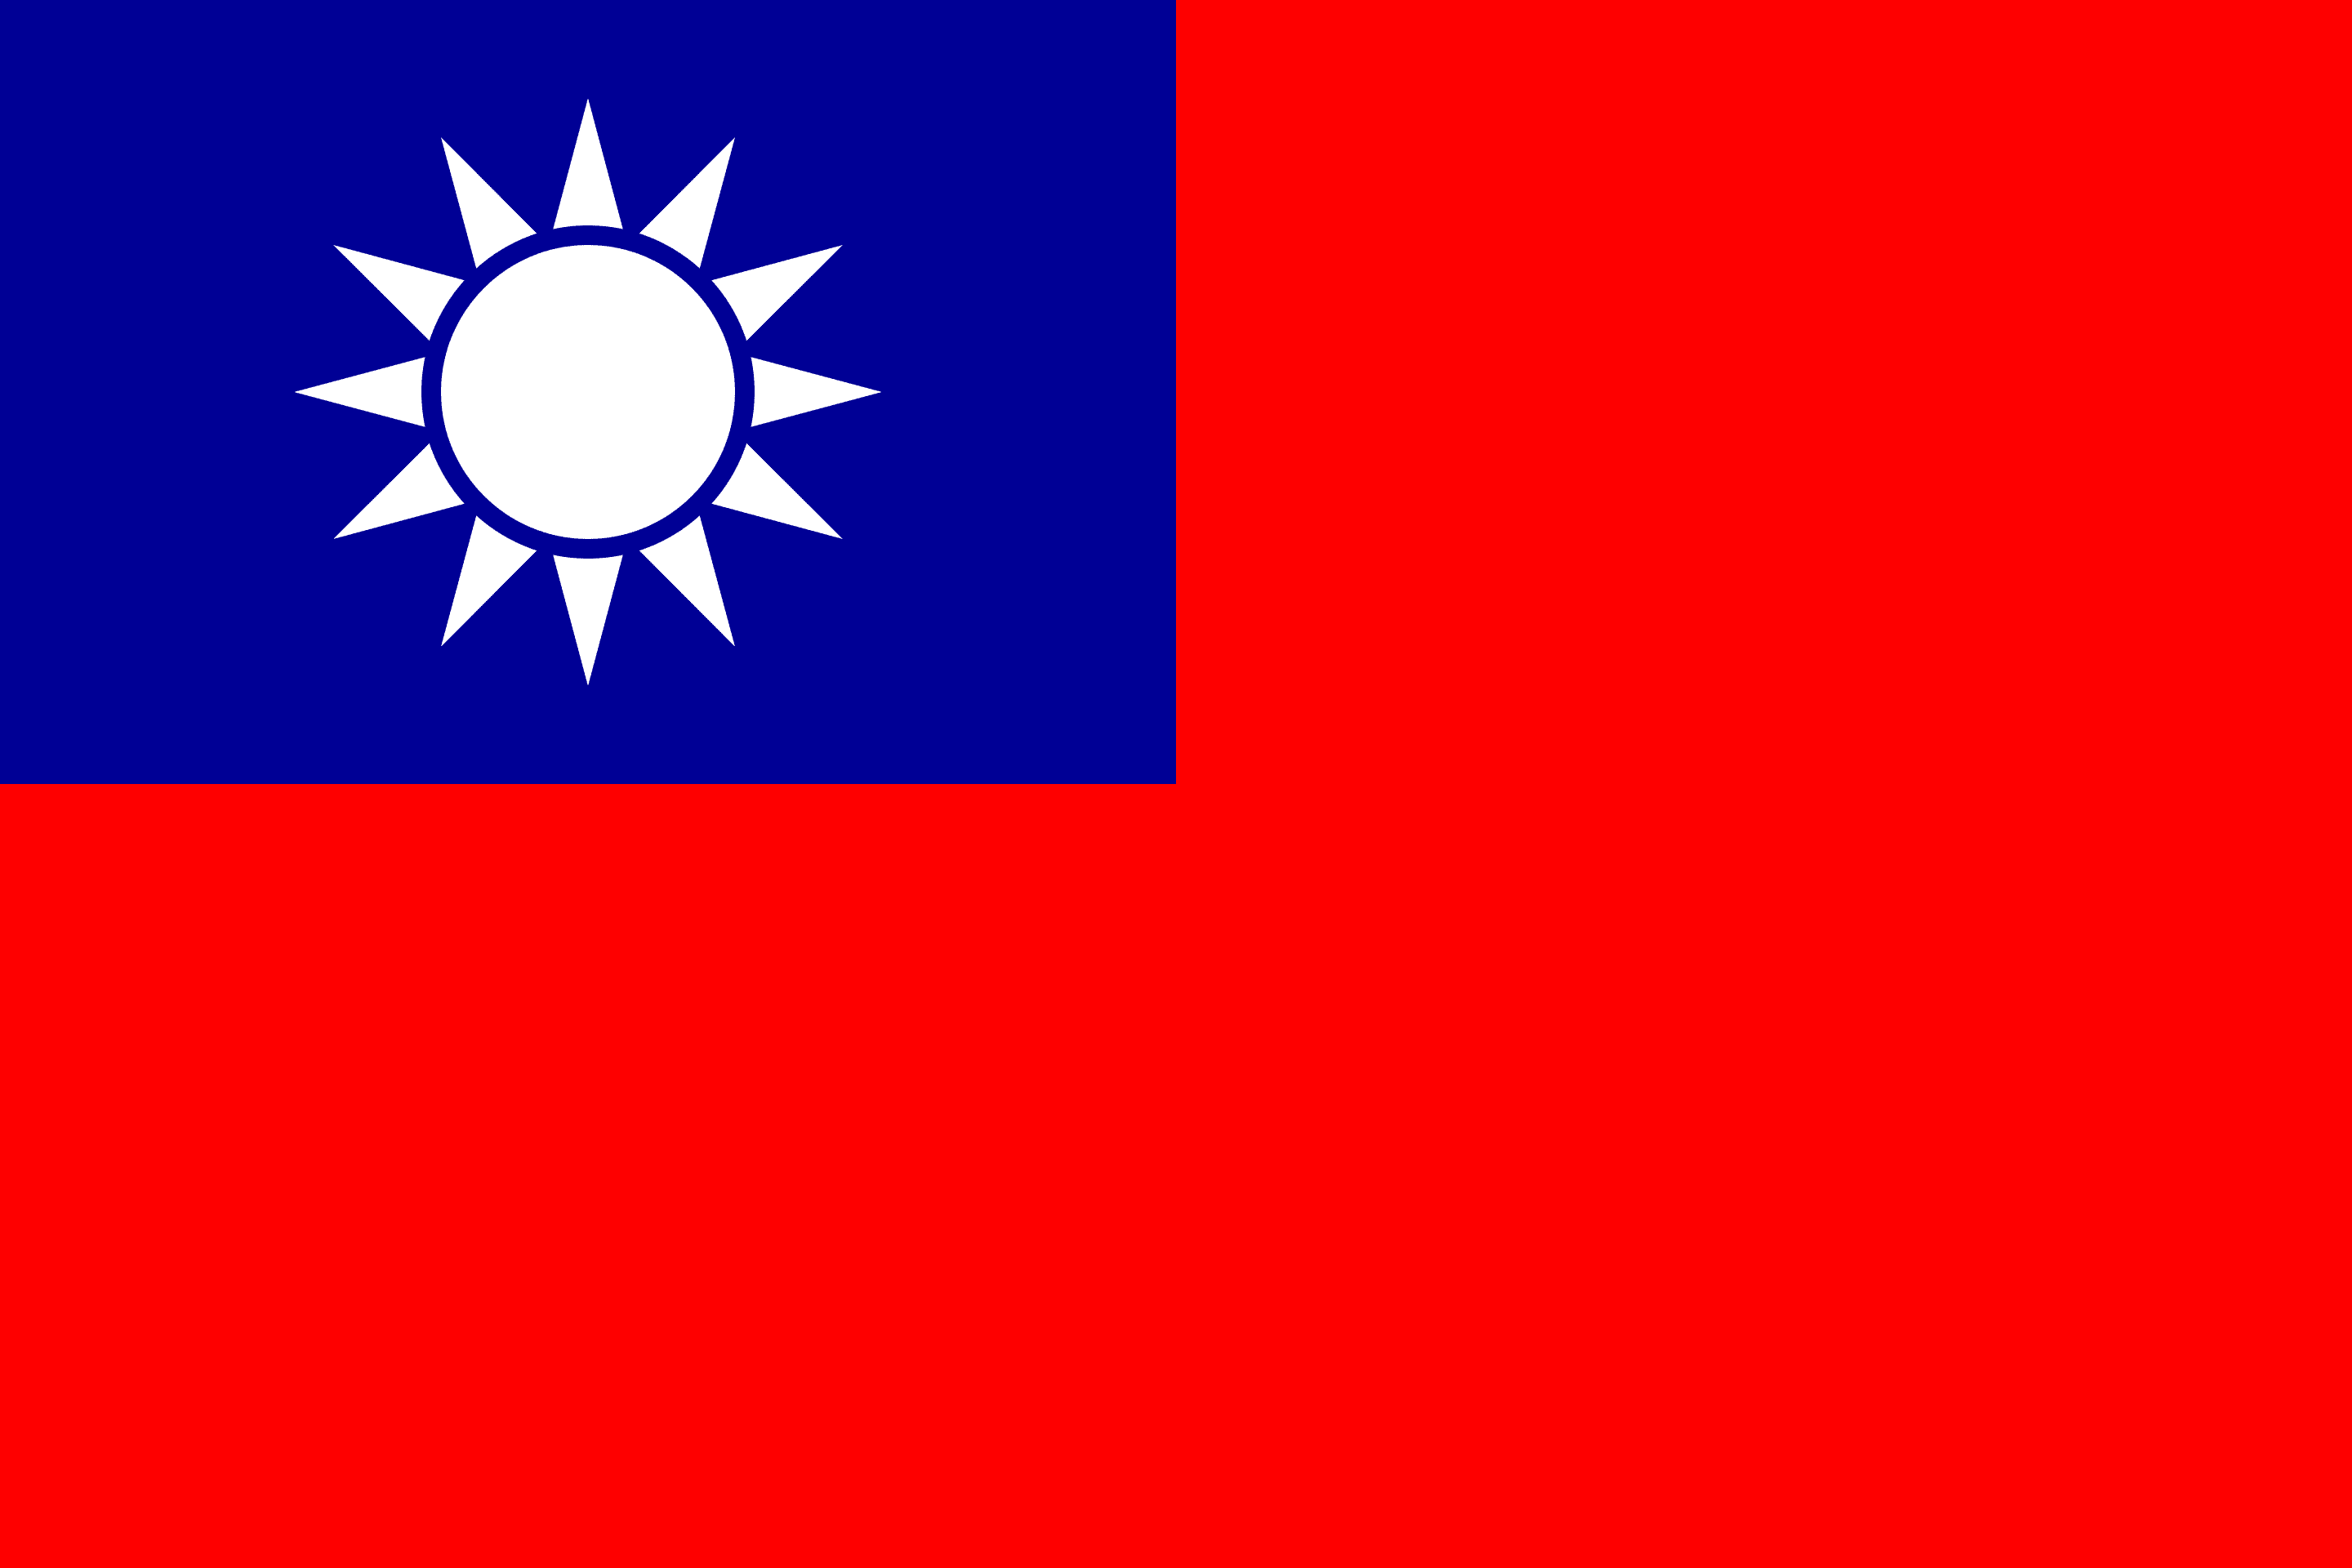 Facts about Taiwan